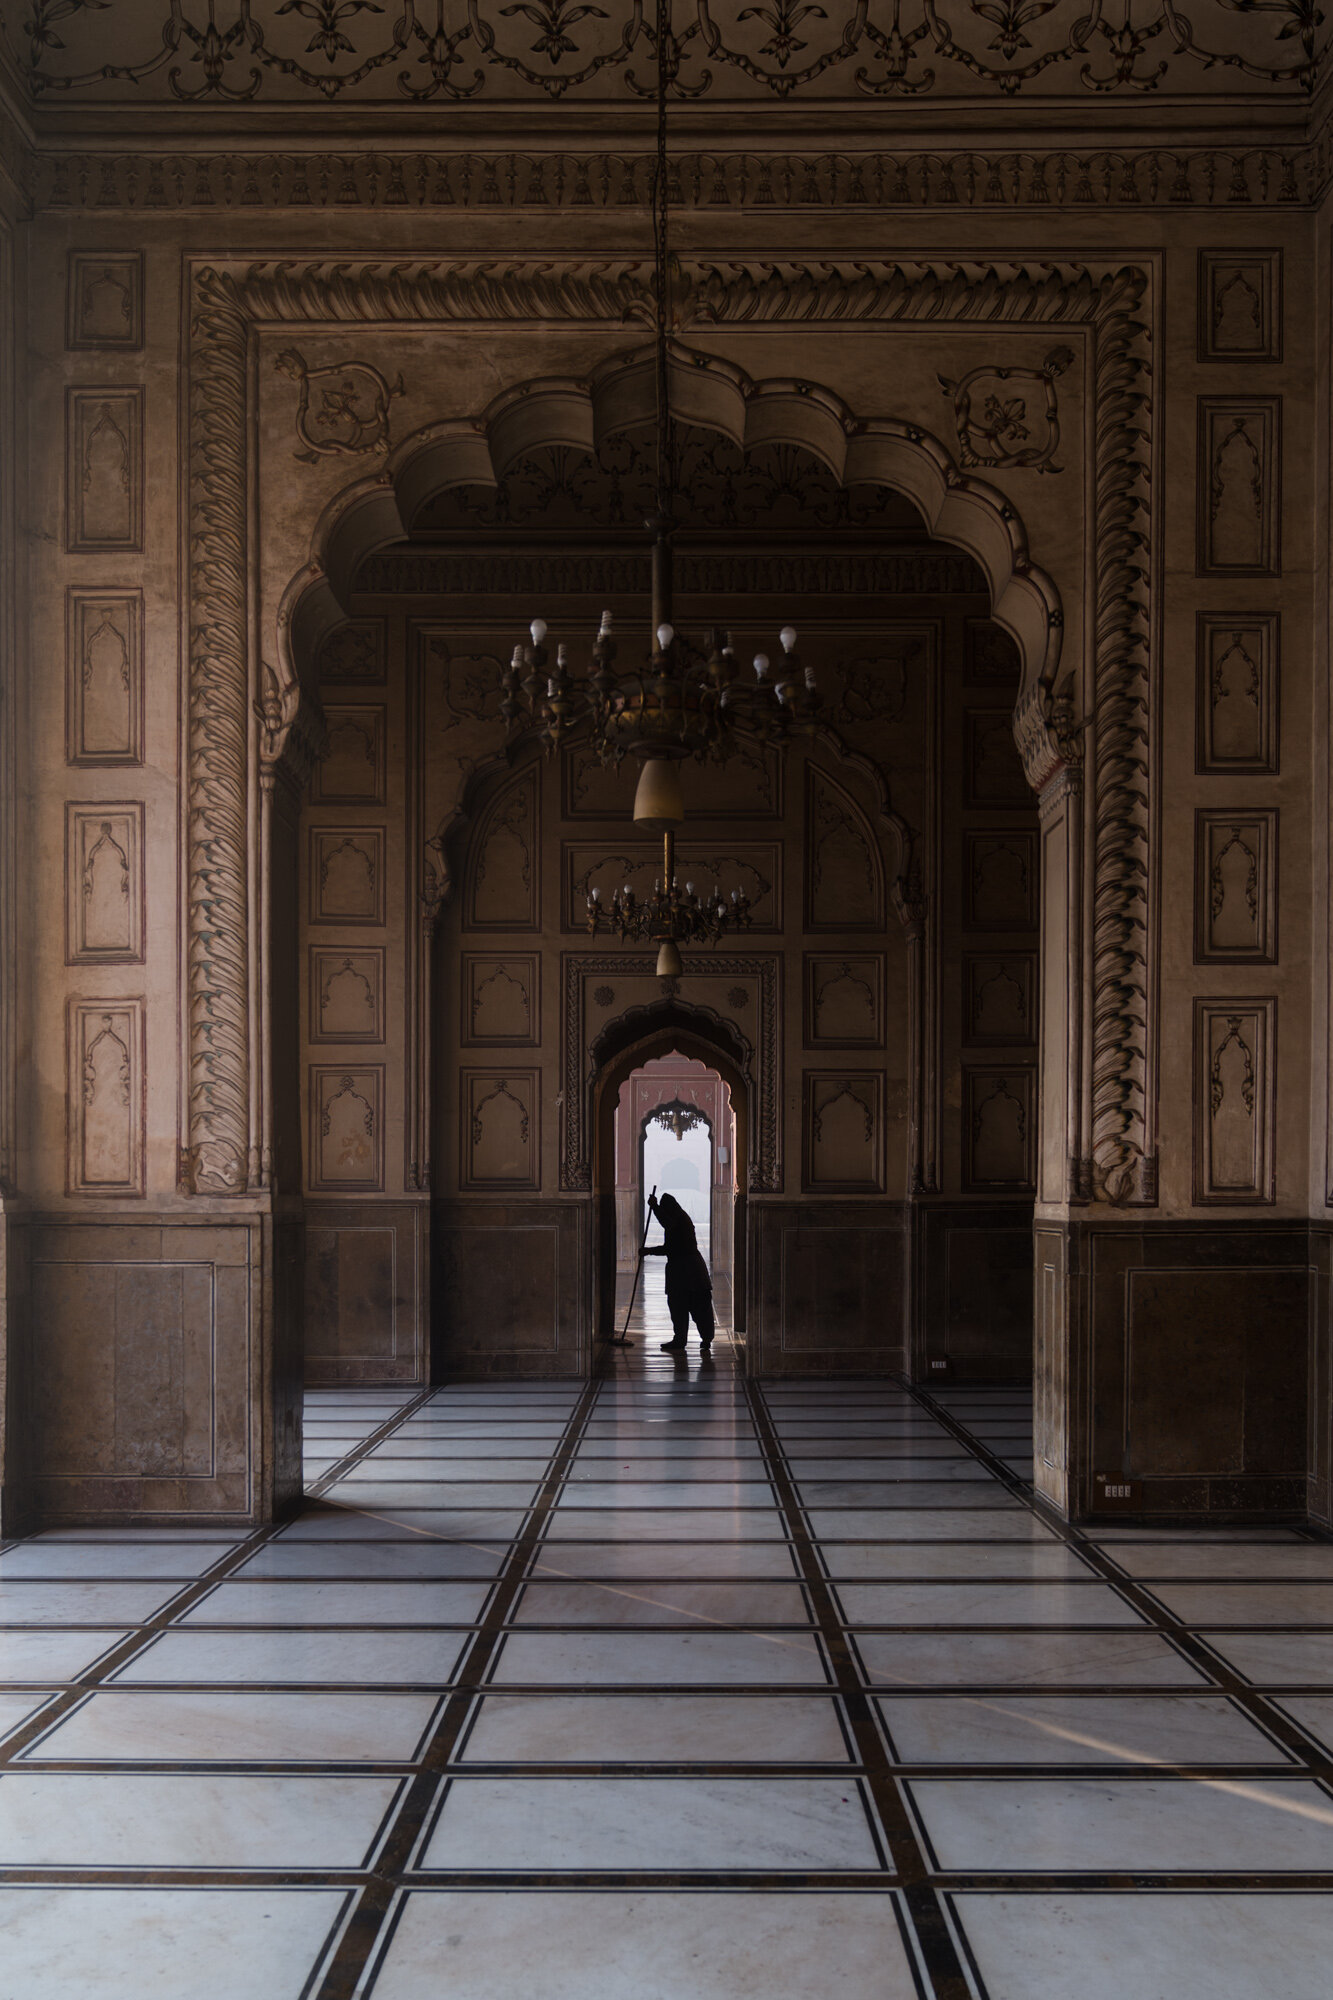  A man cleaning the floors before worshippers arrive 